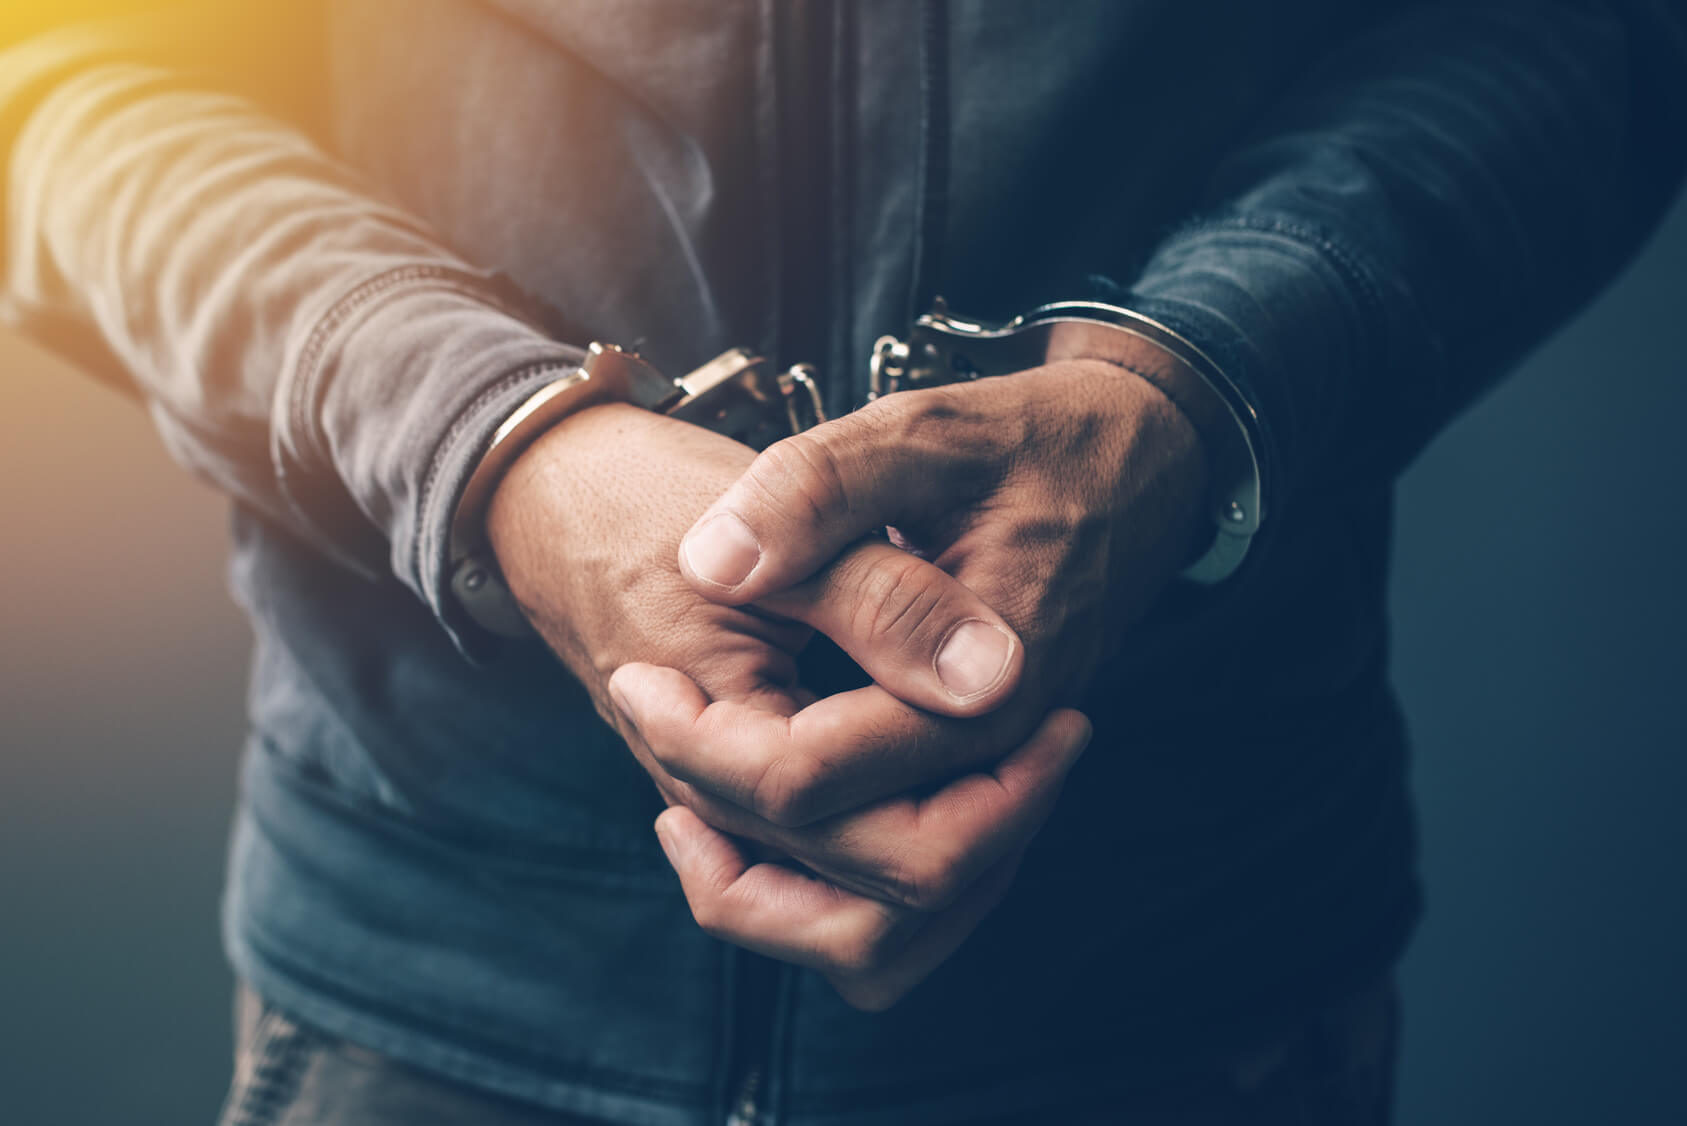 Will I Lose My Broker’s License After an Arrest?